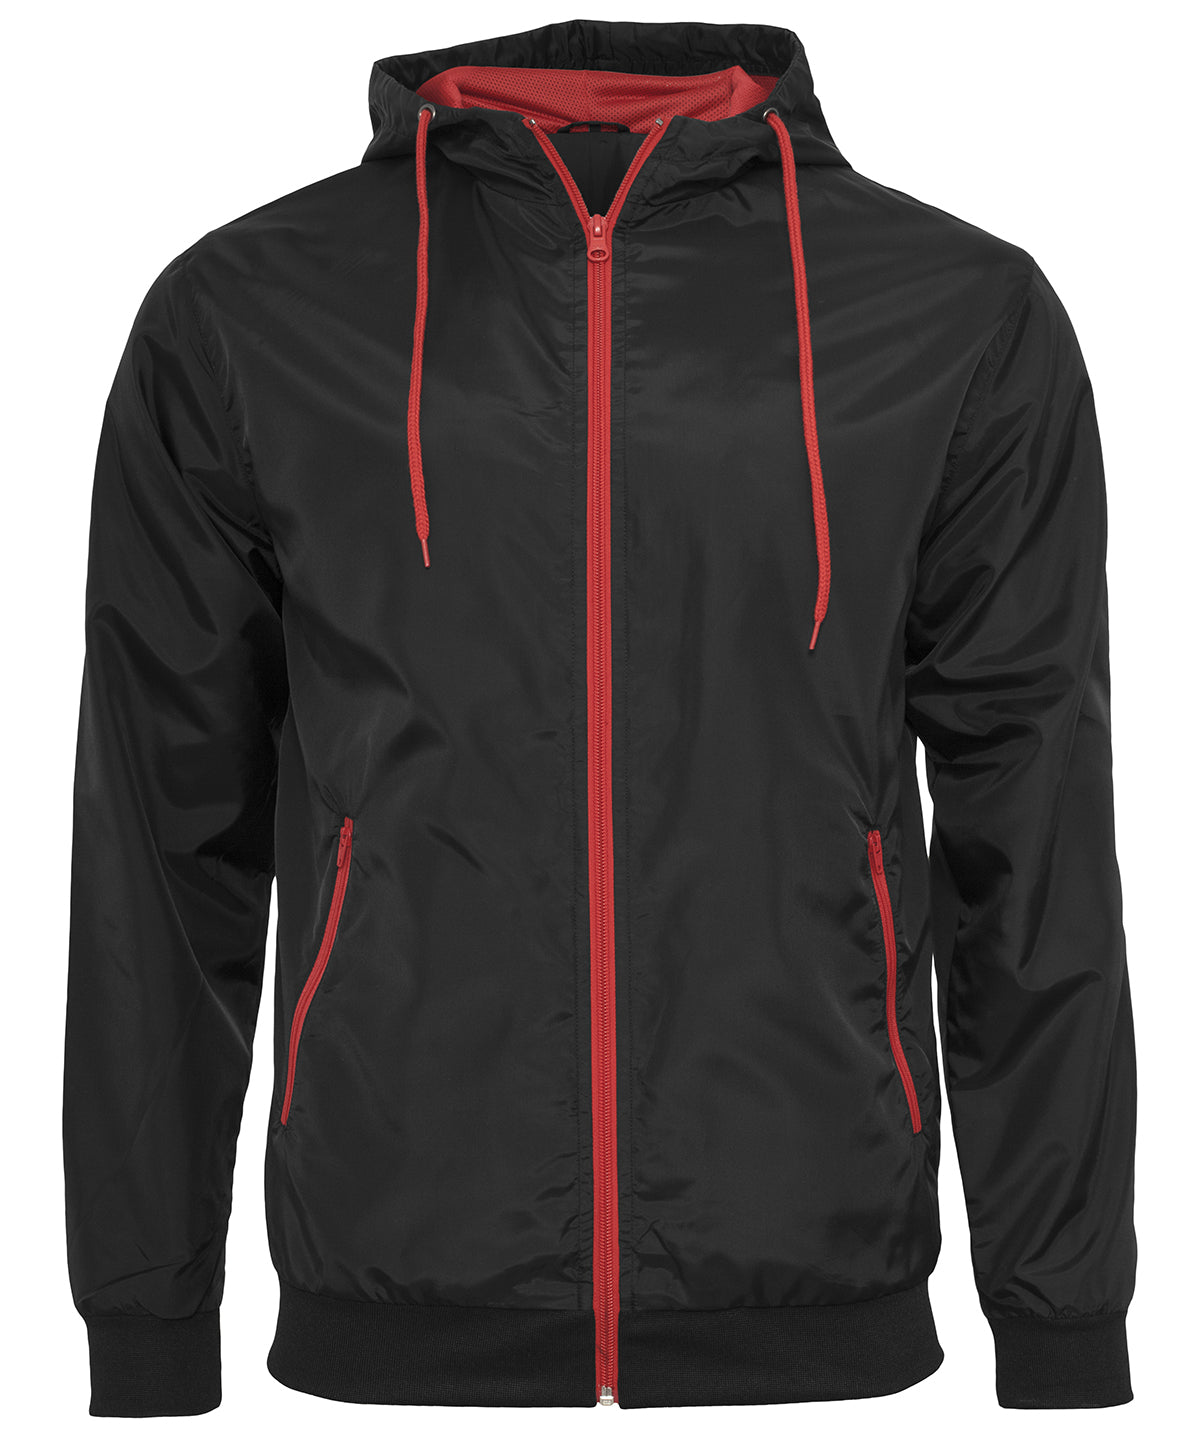 Personalised Jackets - Black Build Your Brand Wind runner